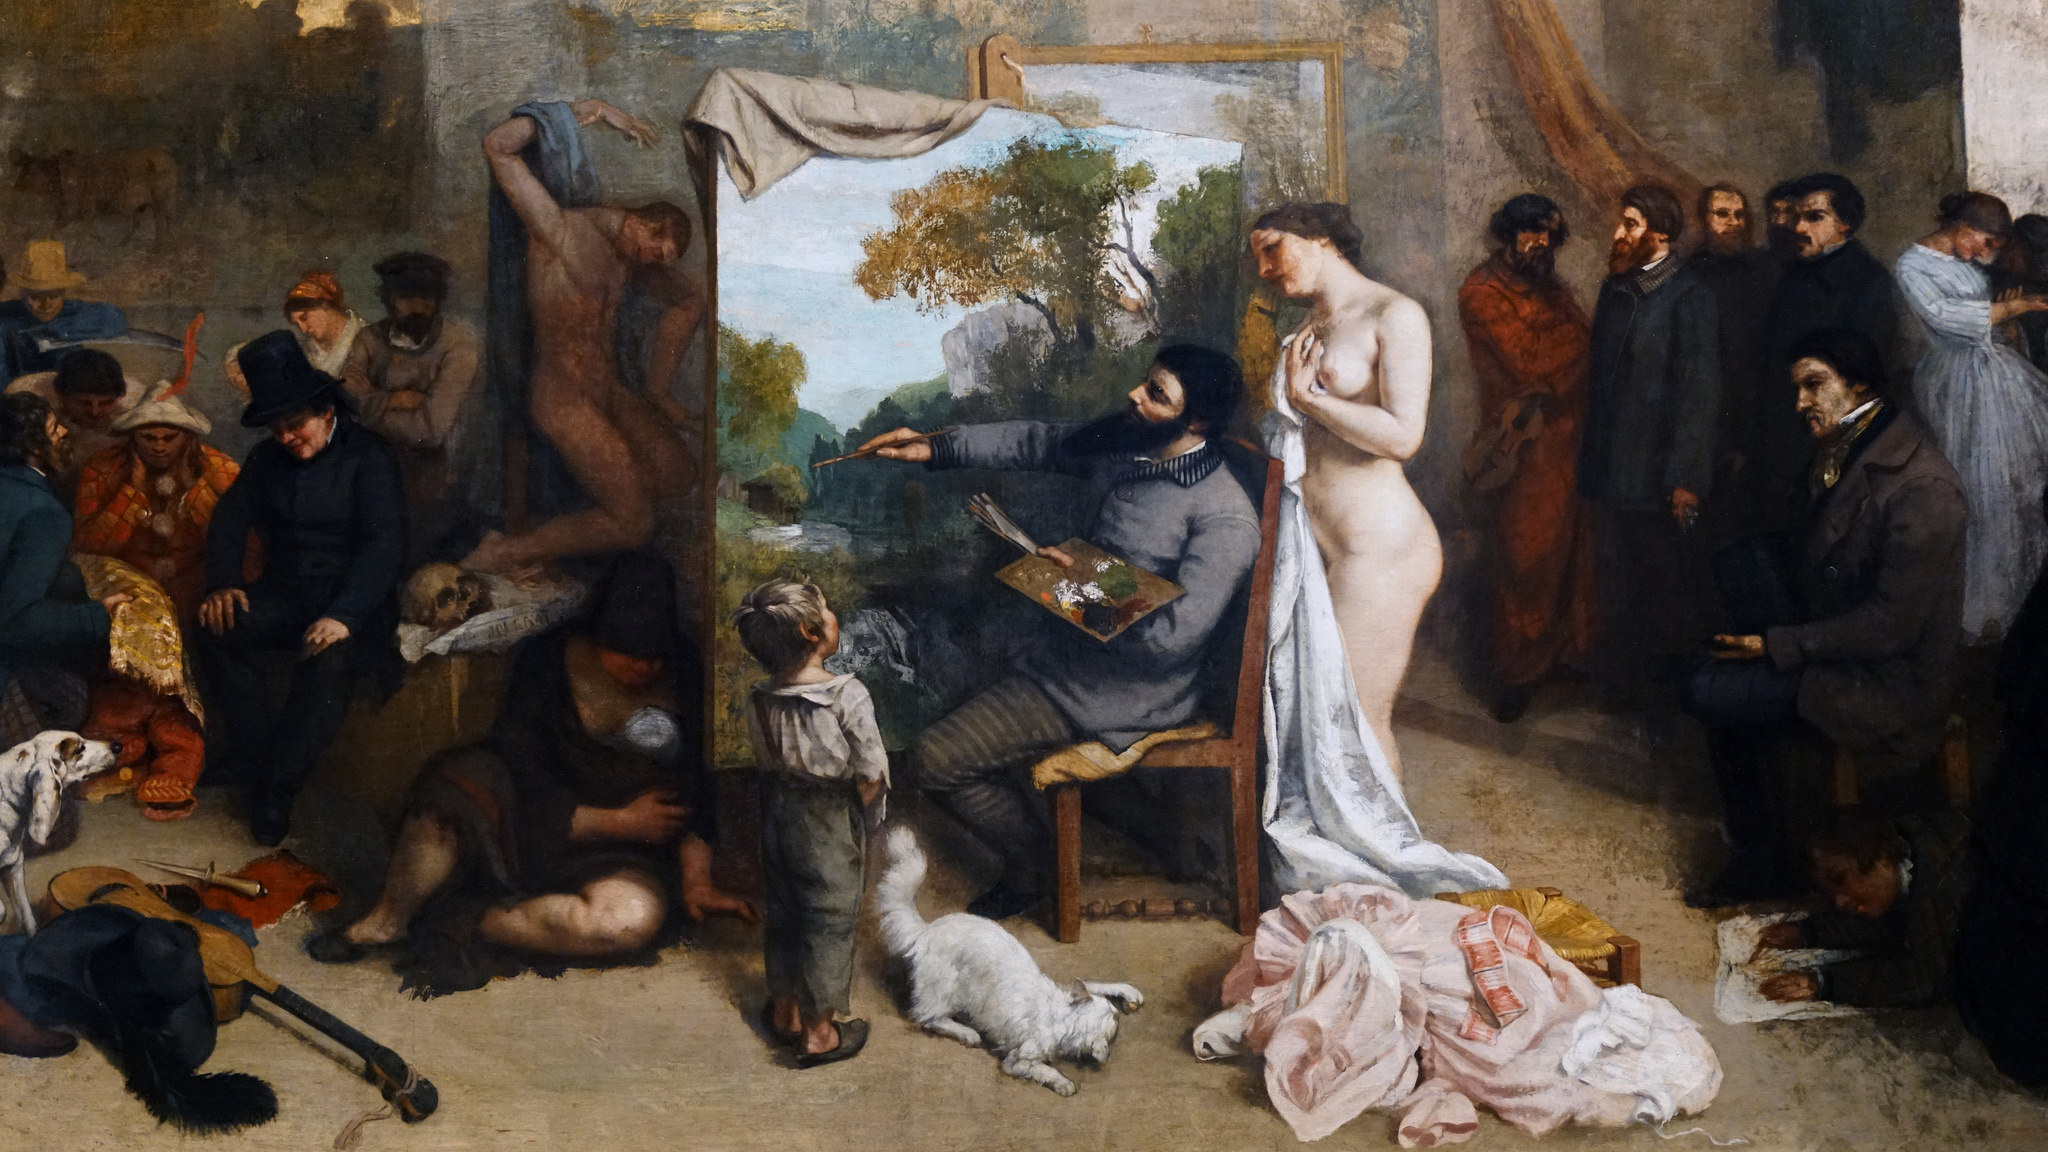 Gustave Courbet, The Painter's Studio: A Real Allegory, 45% OFF